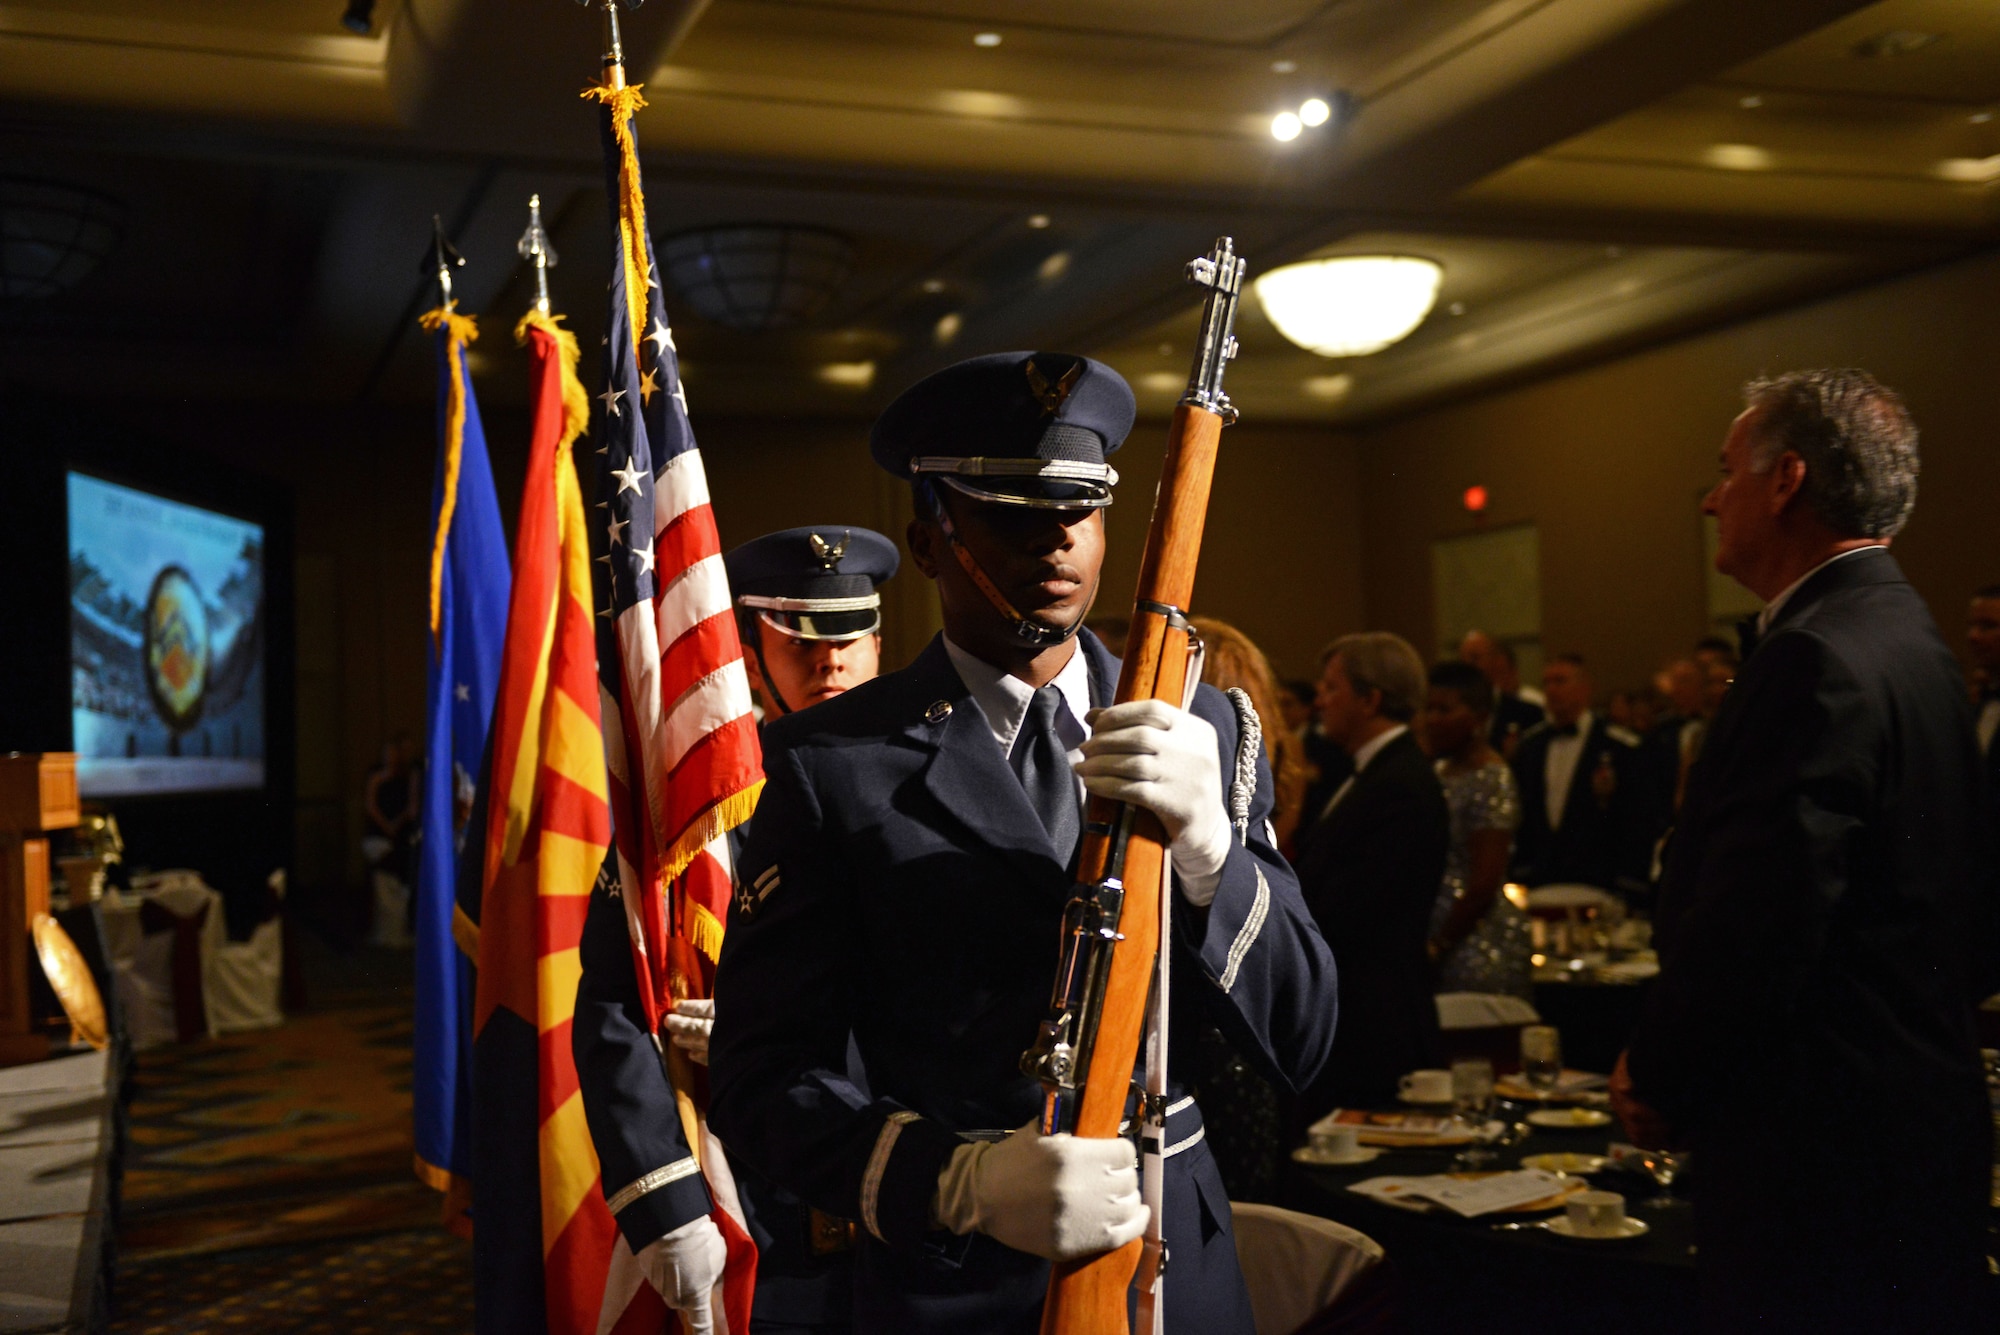 The Luke Air Force Base Color Guard present the colors at the 2017 Annual Awards Banquet in Litchfield Park, Ariz., Jan. 20, 2018. The 2017 Annual Awards Banquet was held to recognize and award the best and brightest Airmen from Luke. (U.S. Air Force Photo/Airman 1st Class Alexander Cook)